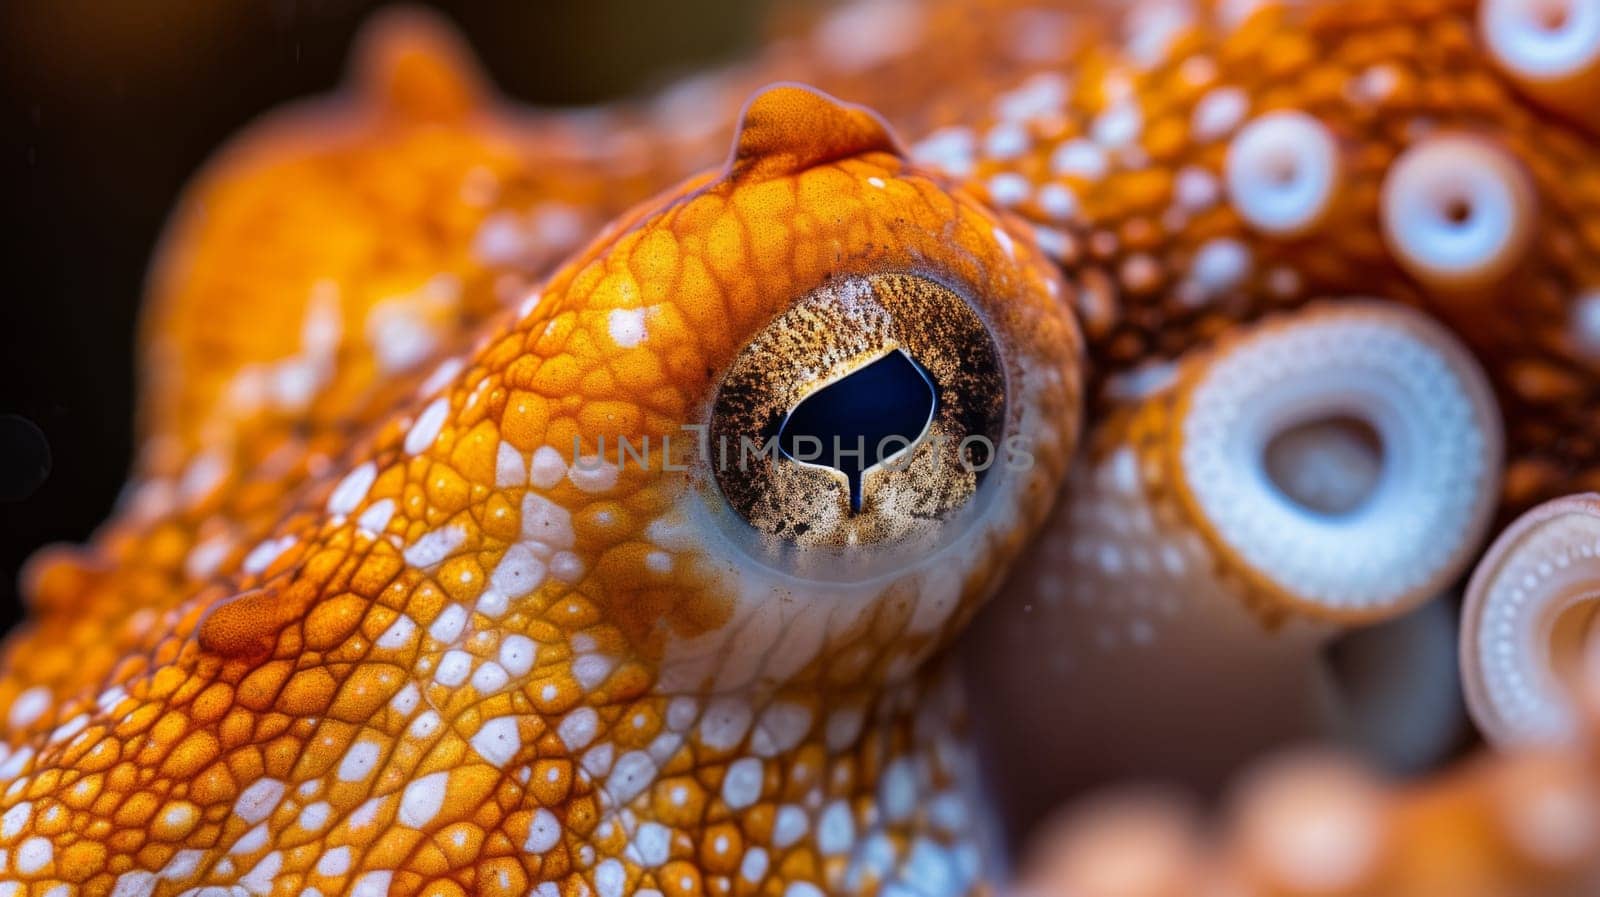 An orange and white octopus with a large eye, AI by starush